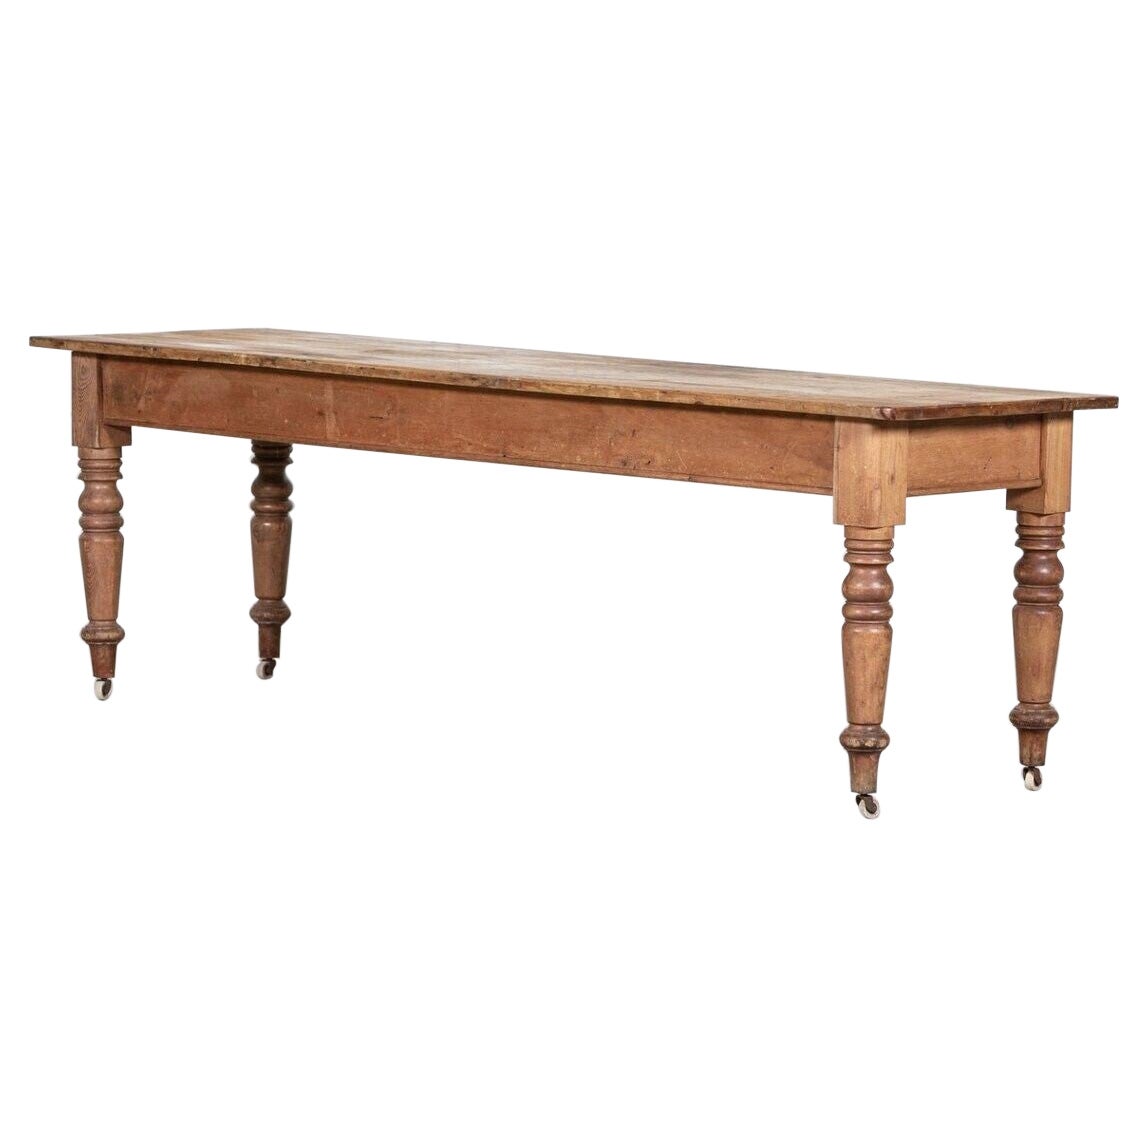 Large 19thC English Pine Farmhouse Table For Sale